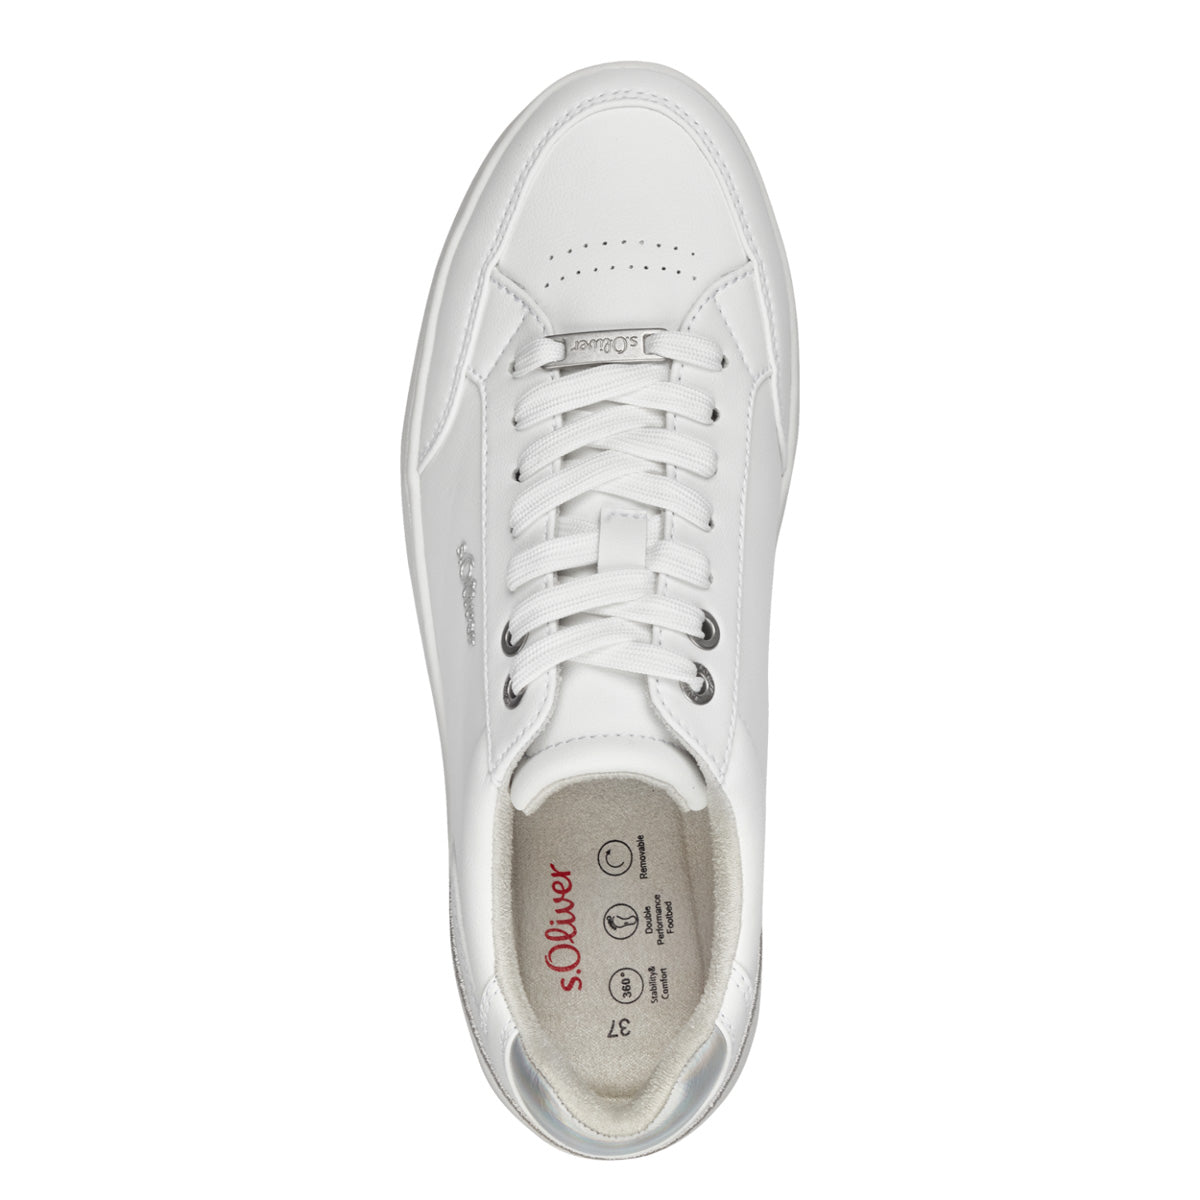 Top view of S.Oliver Platform Shoes, highlighting the white cotton laces and clean design.